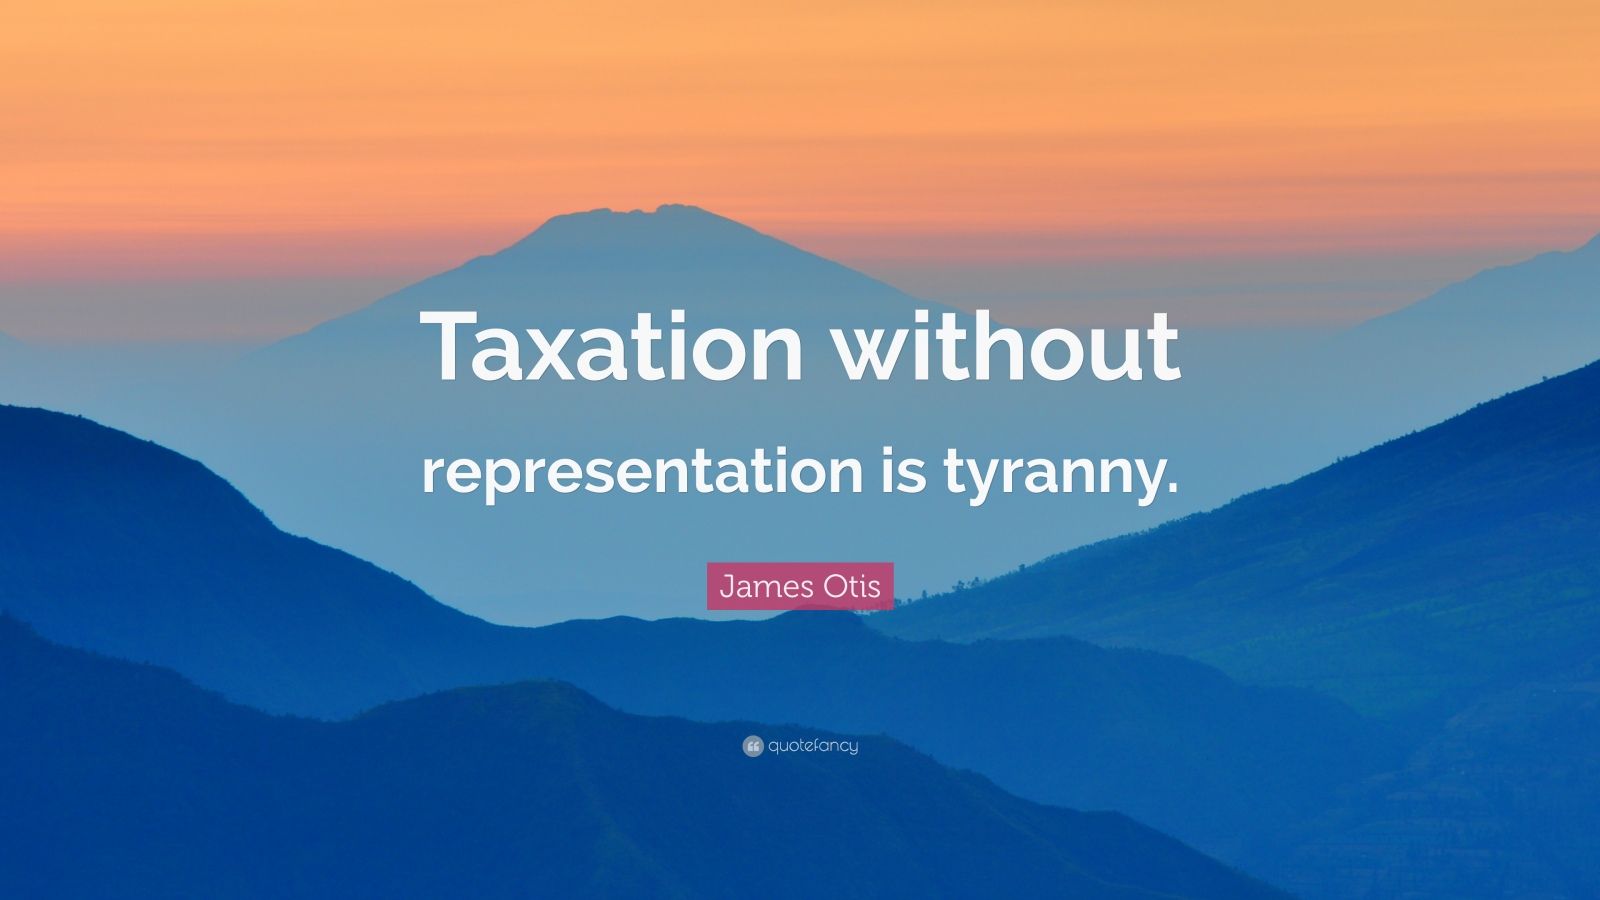 taxation without representation is tyranny meaning in english